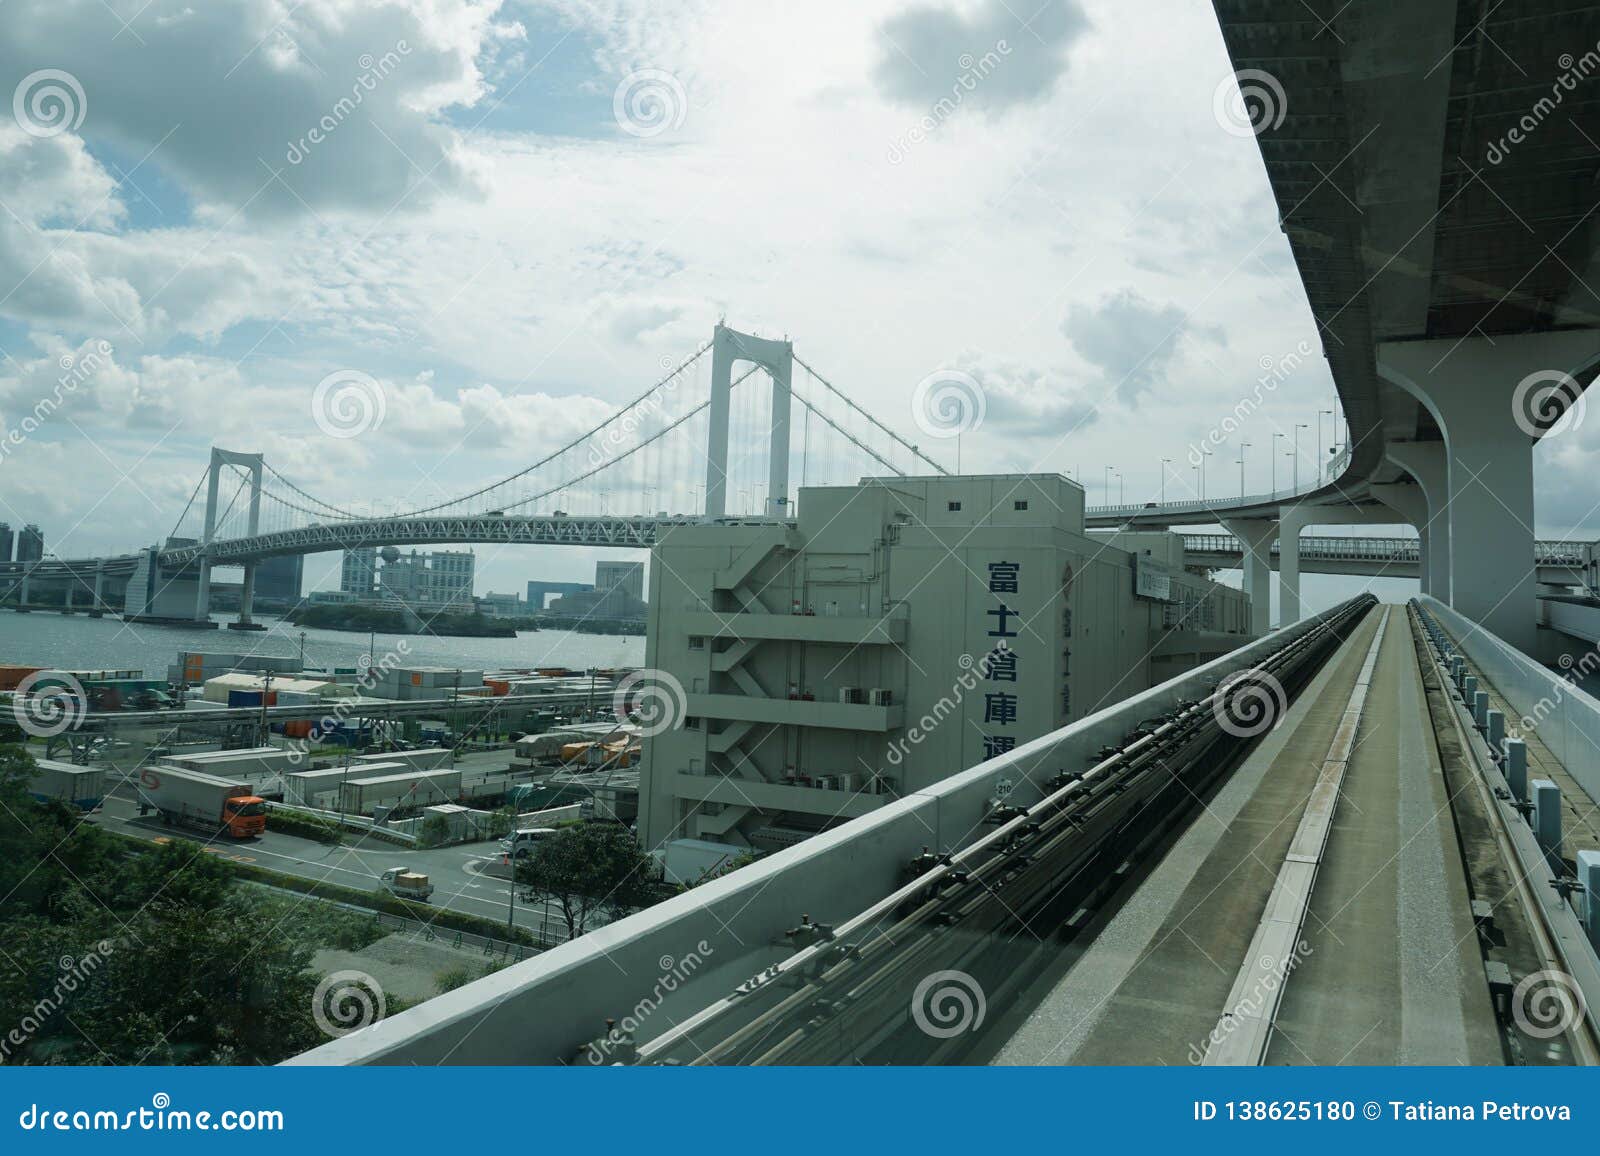 Yurikamome Line In Tokyo View From The Window Editorial Image Image Of Railway Journey